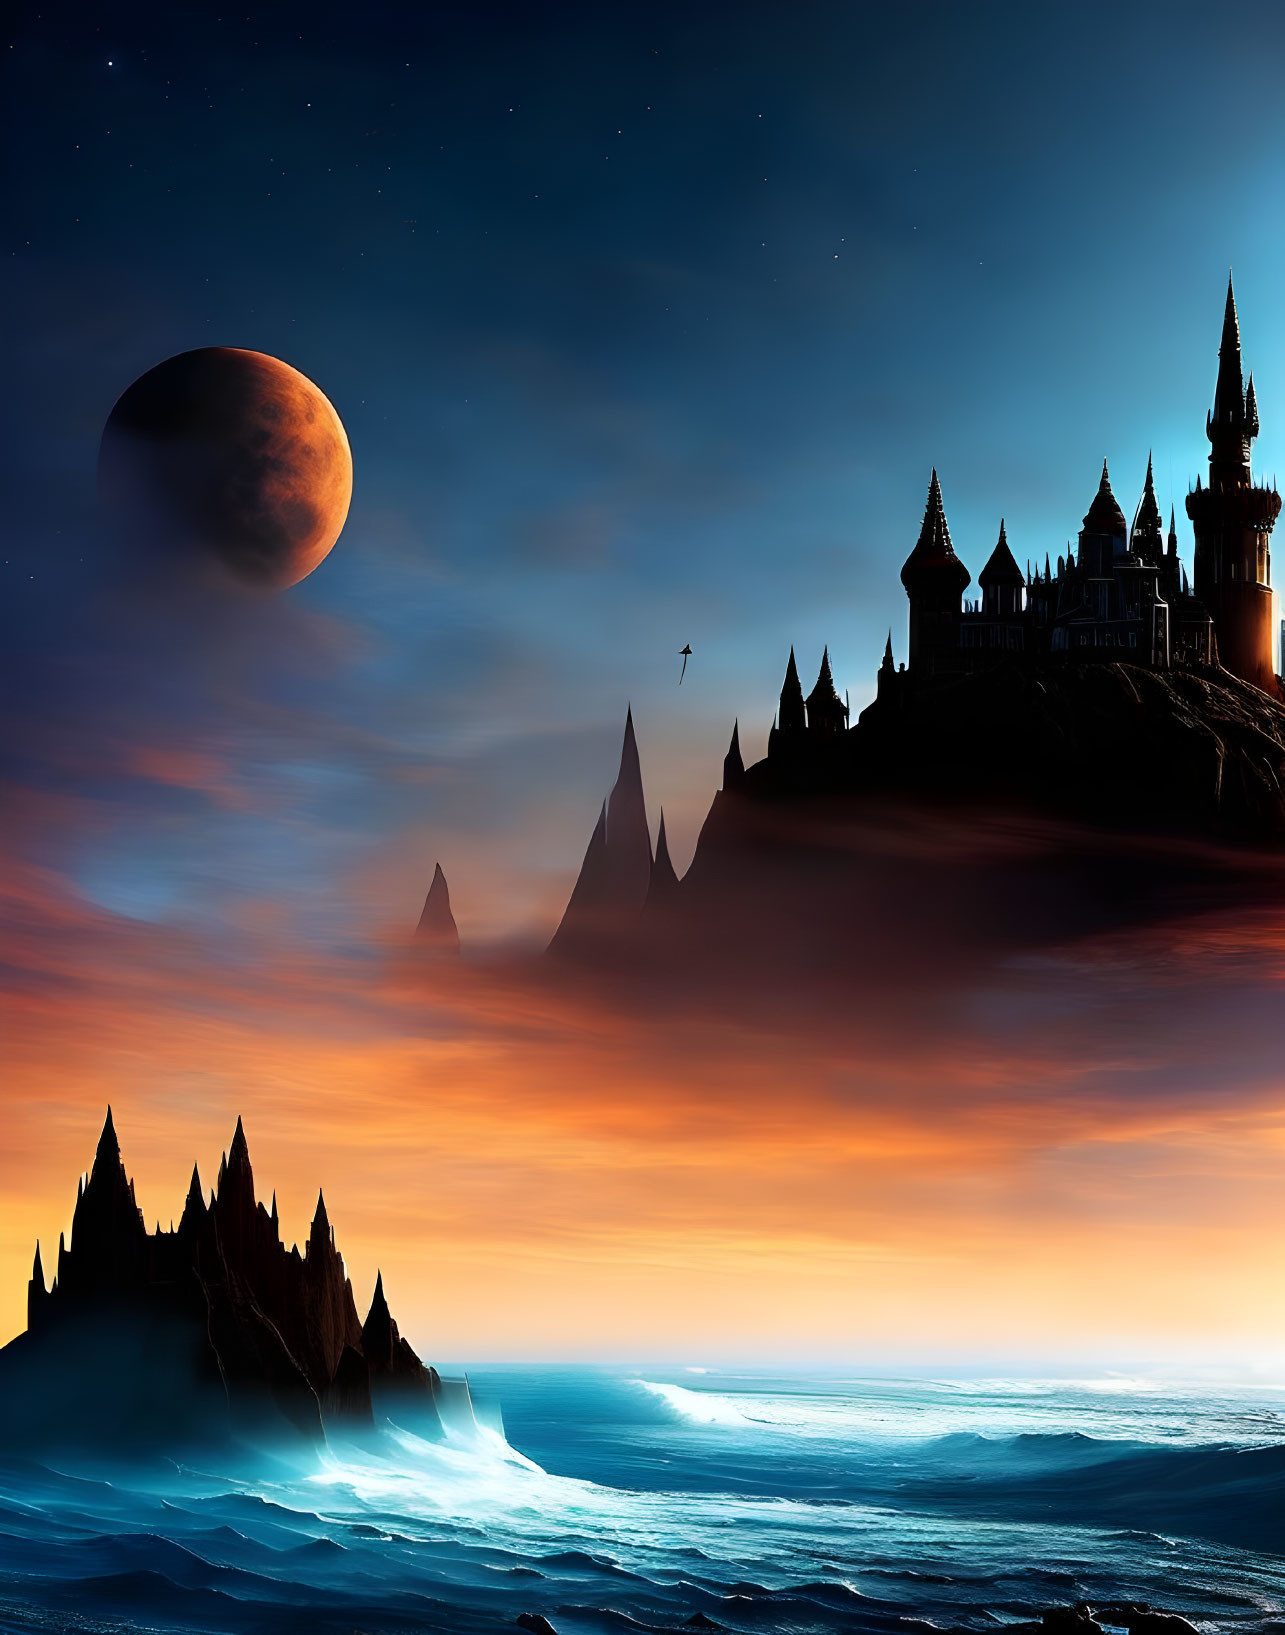 Majestic castle on cliffs under starry sky with moon, ocean waves, figure on broom